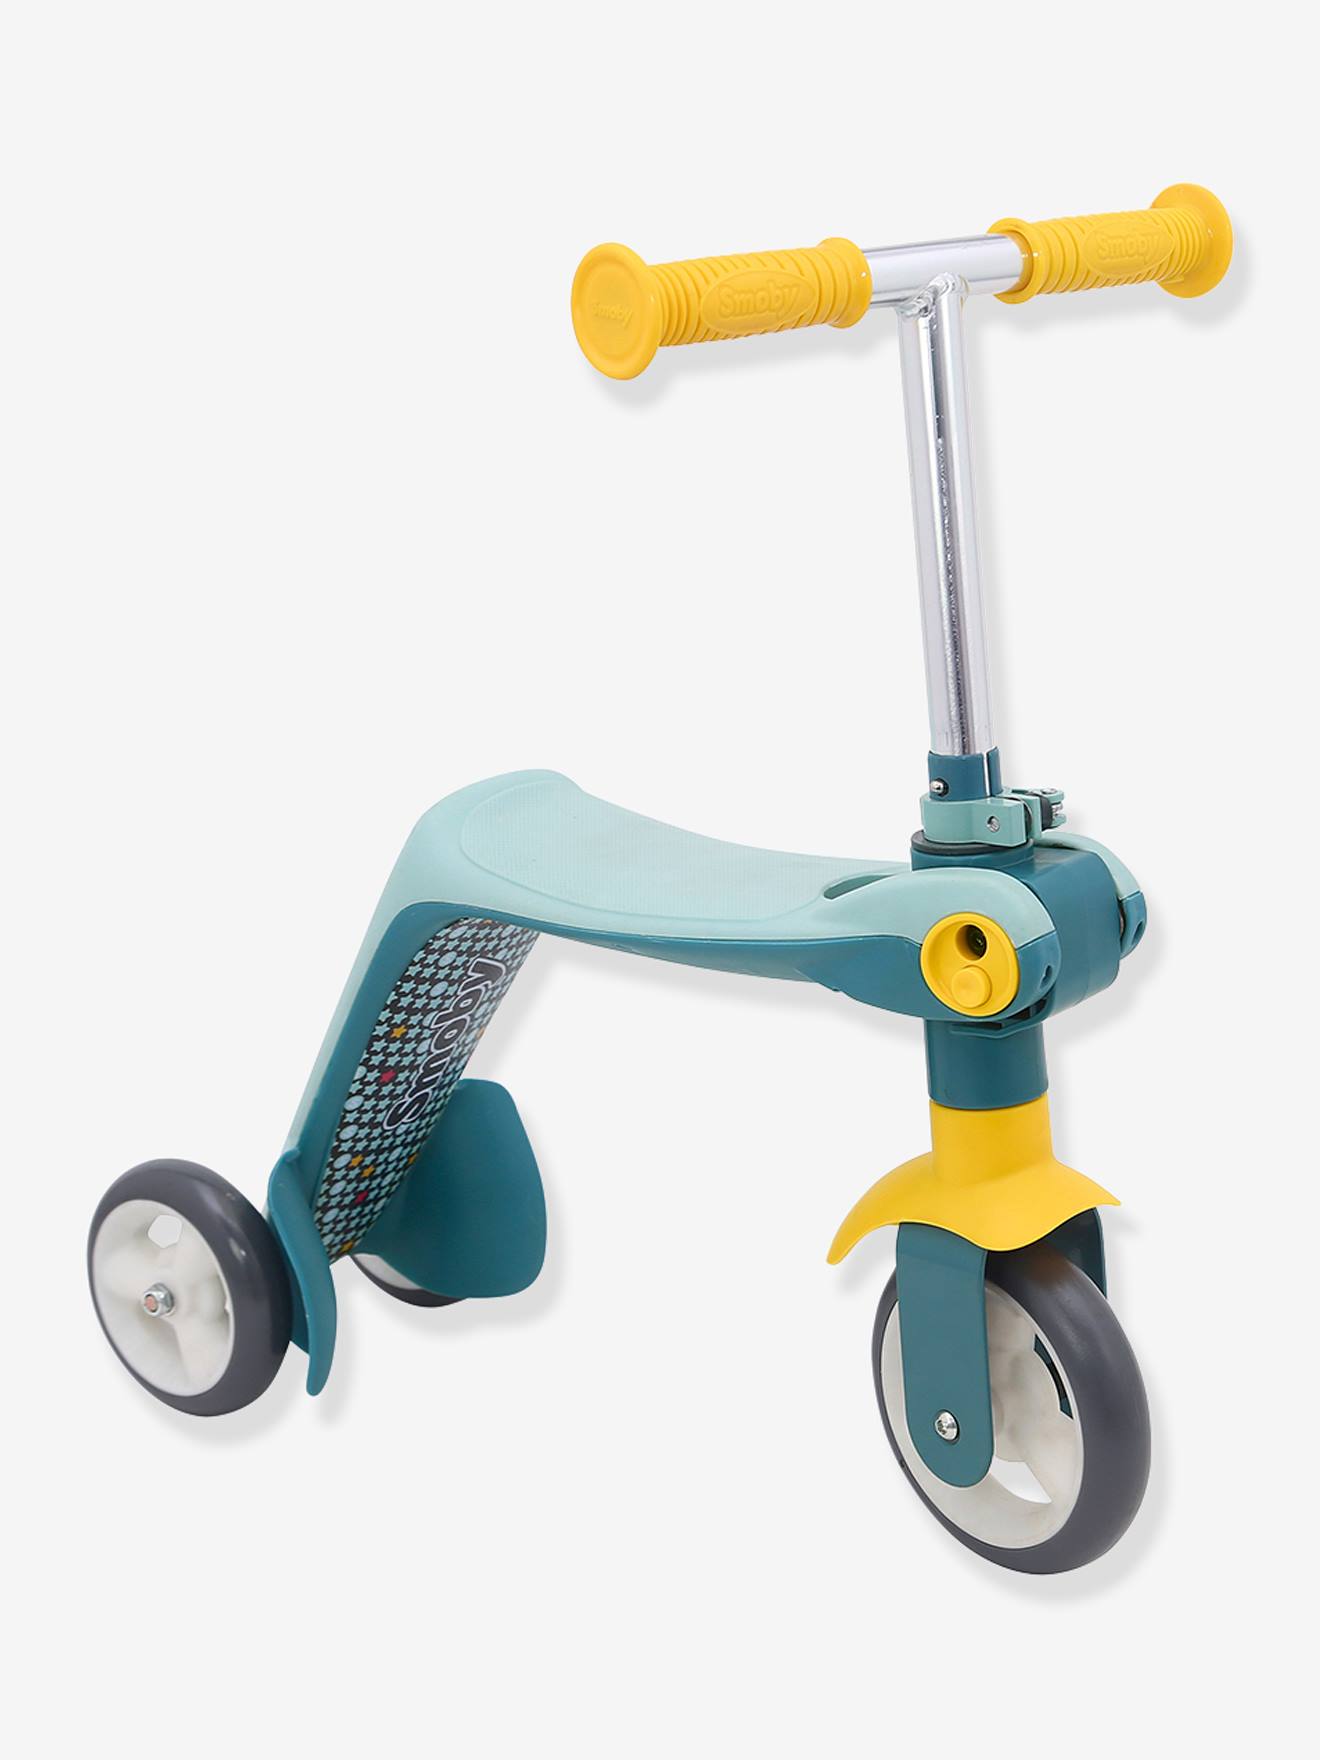 2 in 1 balance bike and scooter